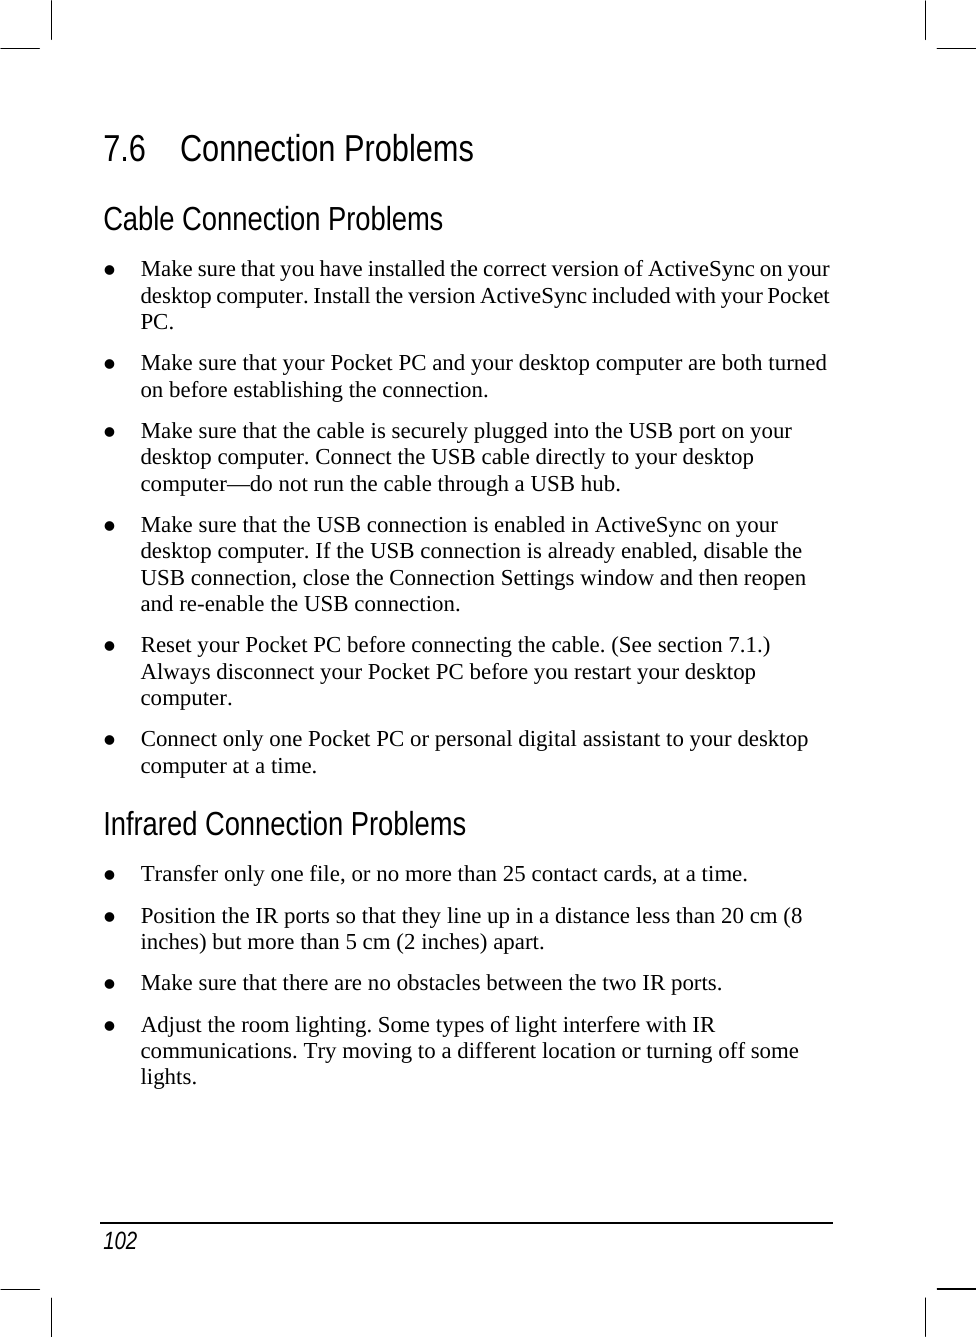  102 7.6 Connection Problems Cable Connection Problems   Make sure that you have installed the correct version of ActiveSync on your desktop computer. Install the version ActiveSync included with your Pocket PC.   Make sure that your Pocket PC and your desktop computer are both turned on before establishing the connection.   Make sure that the cable is securely plugged into the USB port on your desktop computer. Connect the USB cable directly to your desktop computer—do not run the cable through a USB hub.    Make sure that the USB connection is enabled in ActiveSync on your desktop computer. If the USB connection is already enabled, disable the USB connection, close the Connection Settings window and then reopen and re-enable the USB connection.   Reset your Pocket PC before connecting the cable. (See section 7.1.) Always disconnect your Pocket PC before you restart your desktop computer.    Connect only one Pocket PC or personal digital assistant to your desktop computer at a time. Infrared Connection Problems   Transfer only one file, or no more than 25 contact cards, at a time.   Position the IR ports so that they line up in a distance less than 20 cm (8 inches) but more than 5 cm (2 inches) apart.   Make sure that there are no obstacles between the two IR ports.   Adjust the room lighting. Some types of light interfere with IR communications. Try moving to a different location or turning off some lights. 